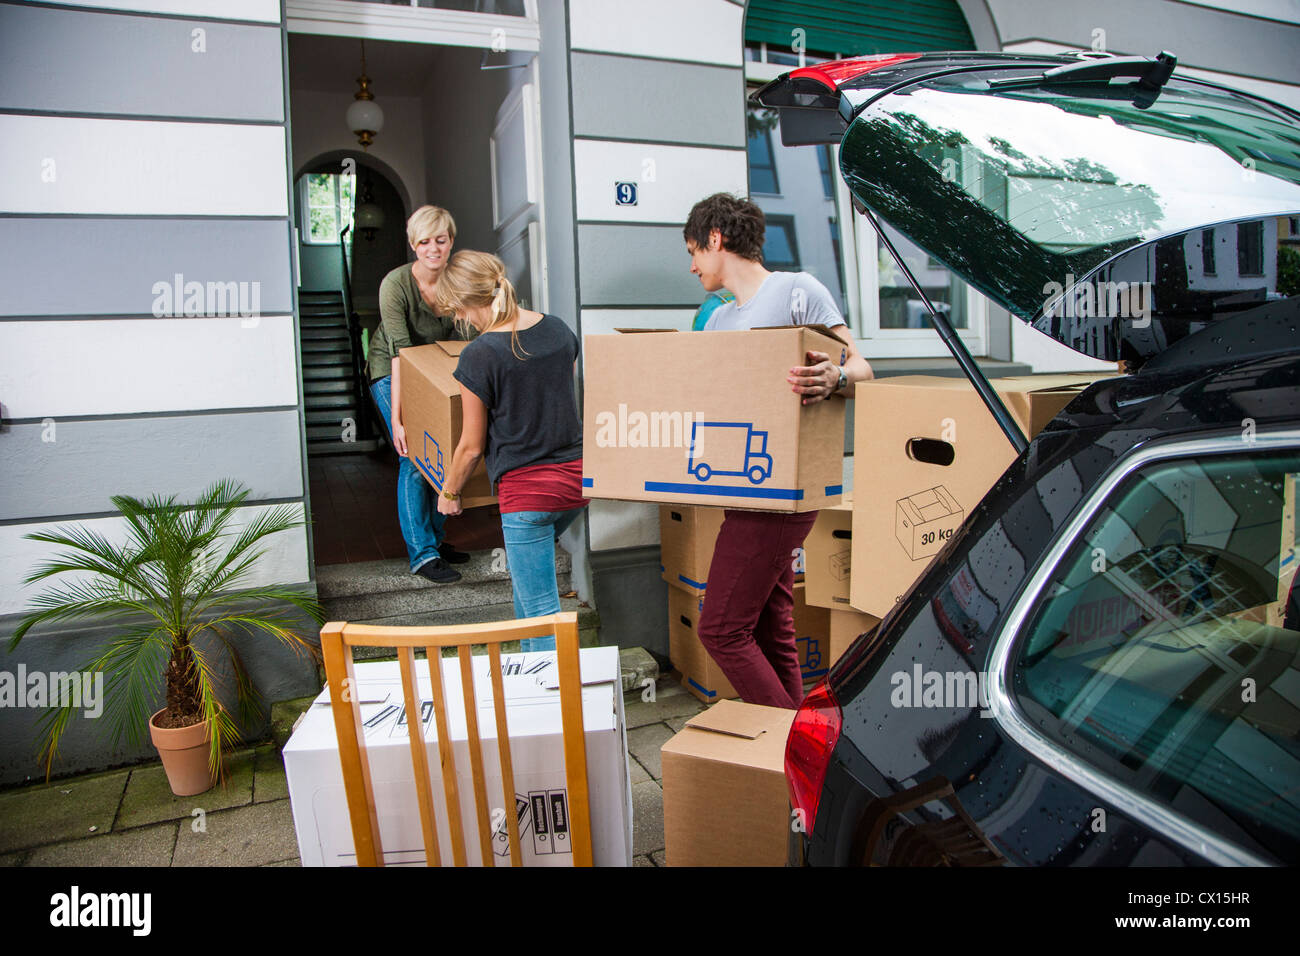 Moving into a new apartment. Friends help carrying moving boxes, furniture, things, from a car into the new house. Stock Photo